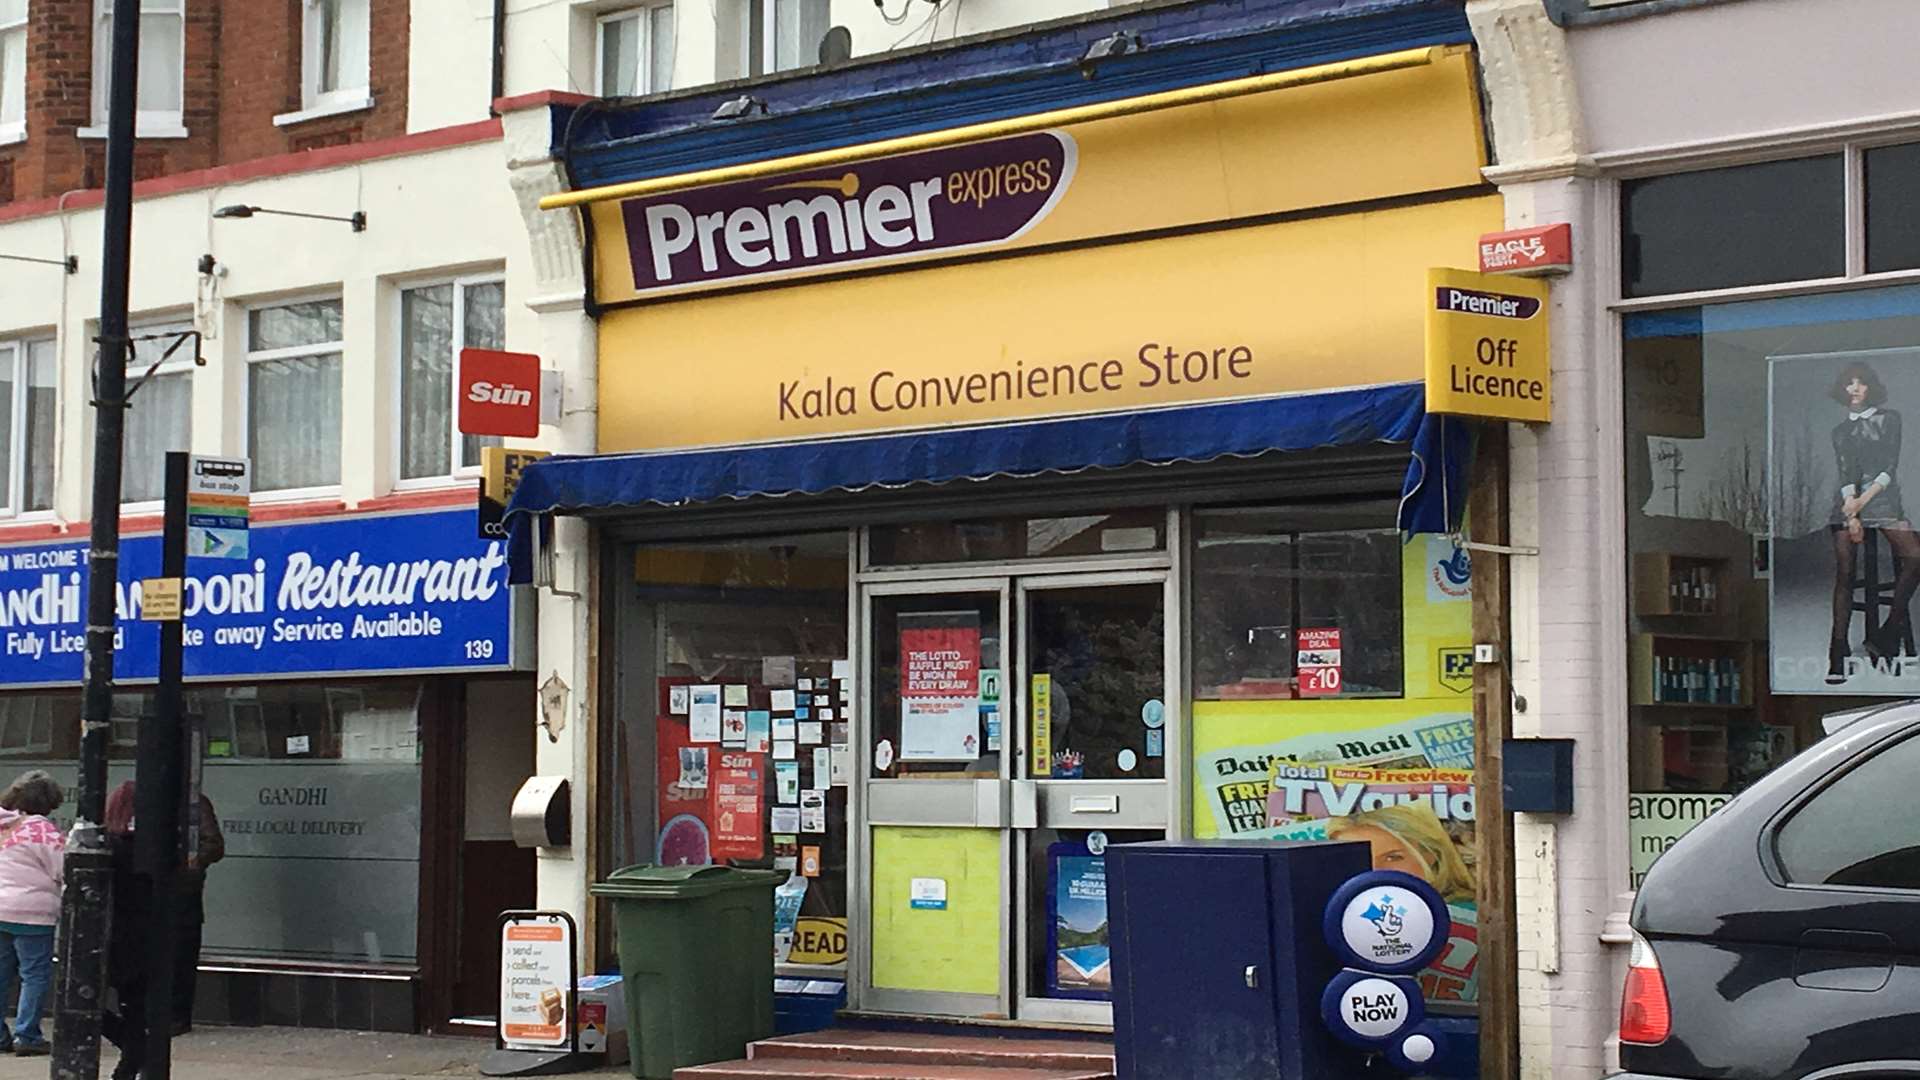 The Kala Convenience Store in Herne Bay